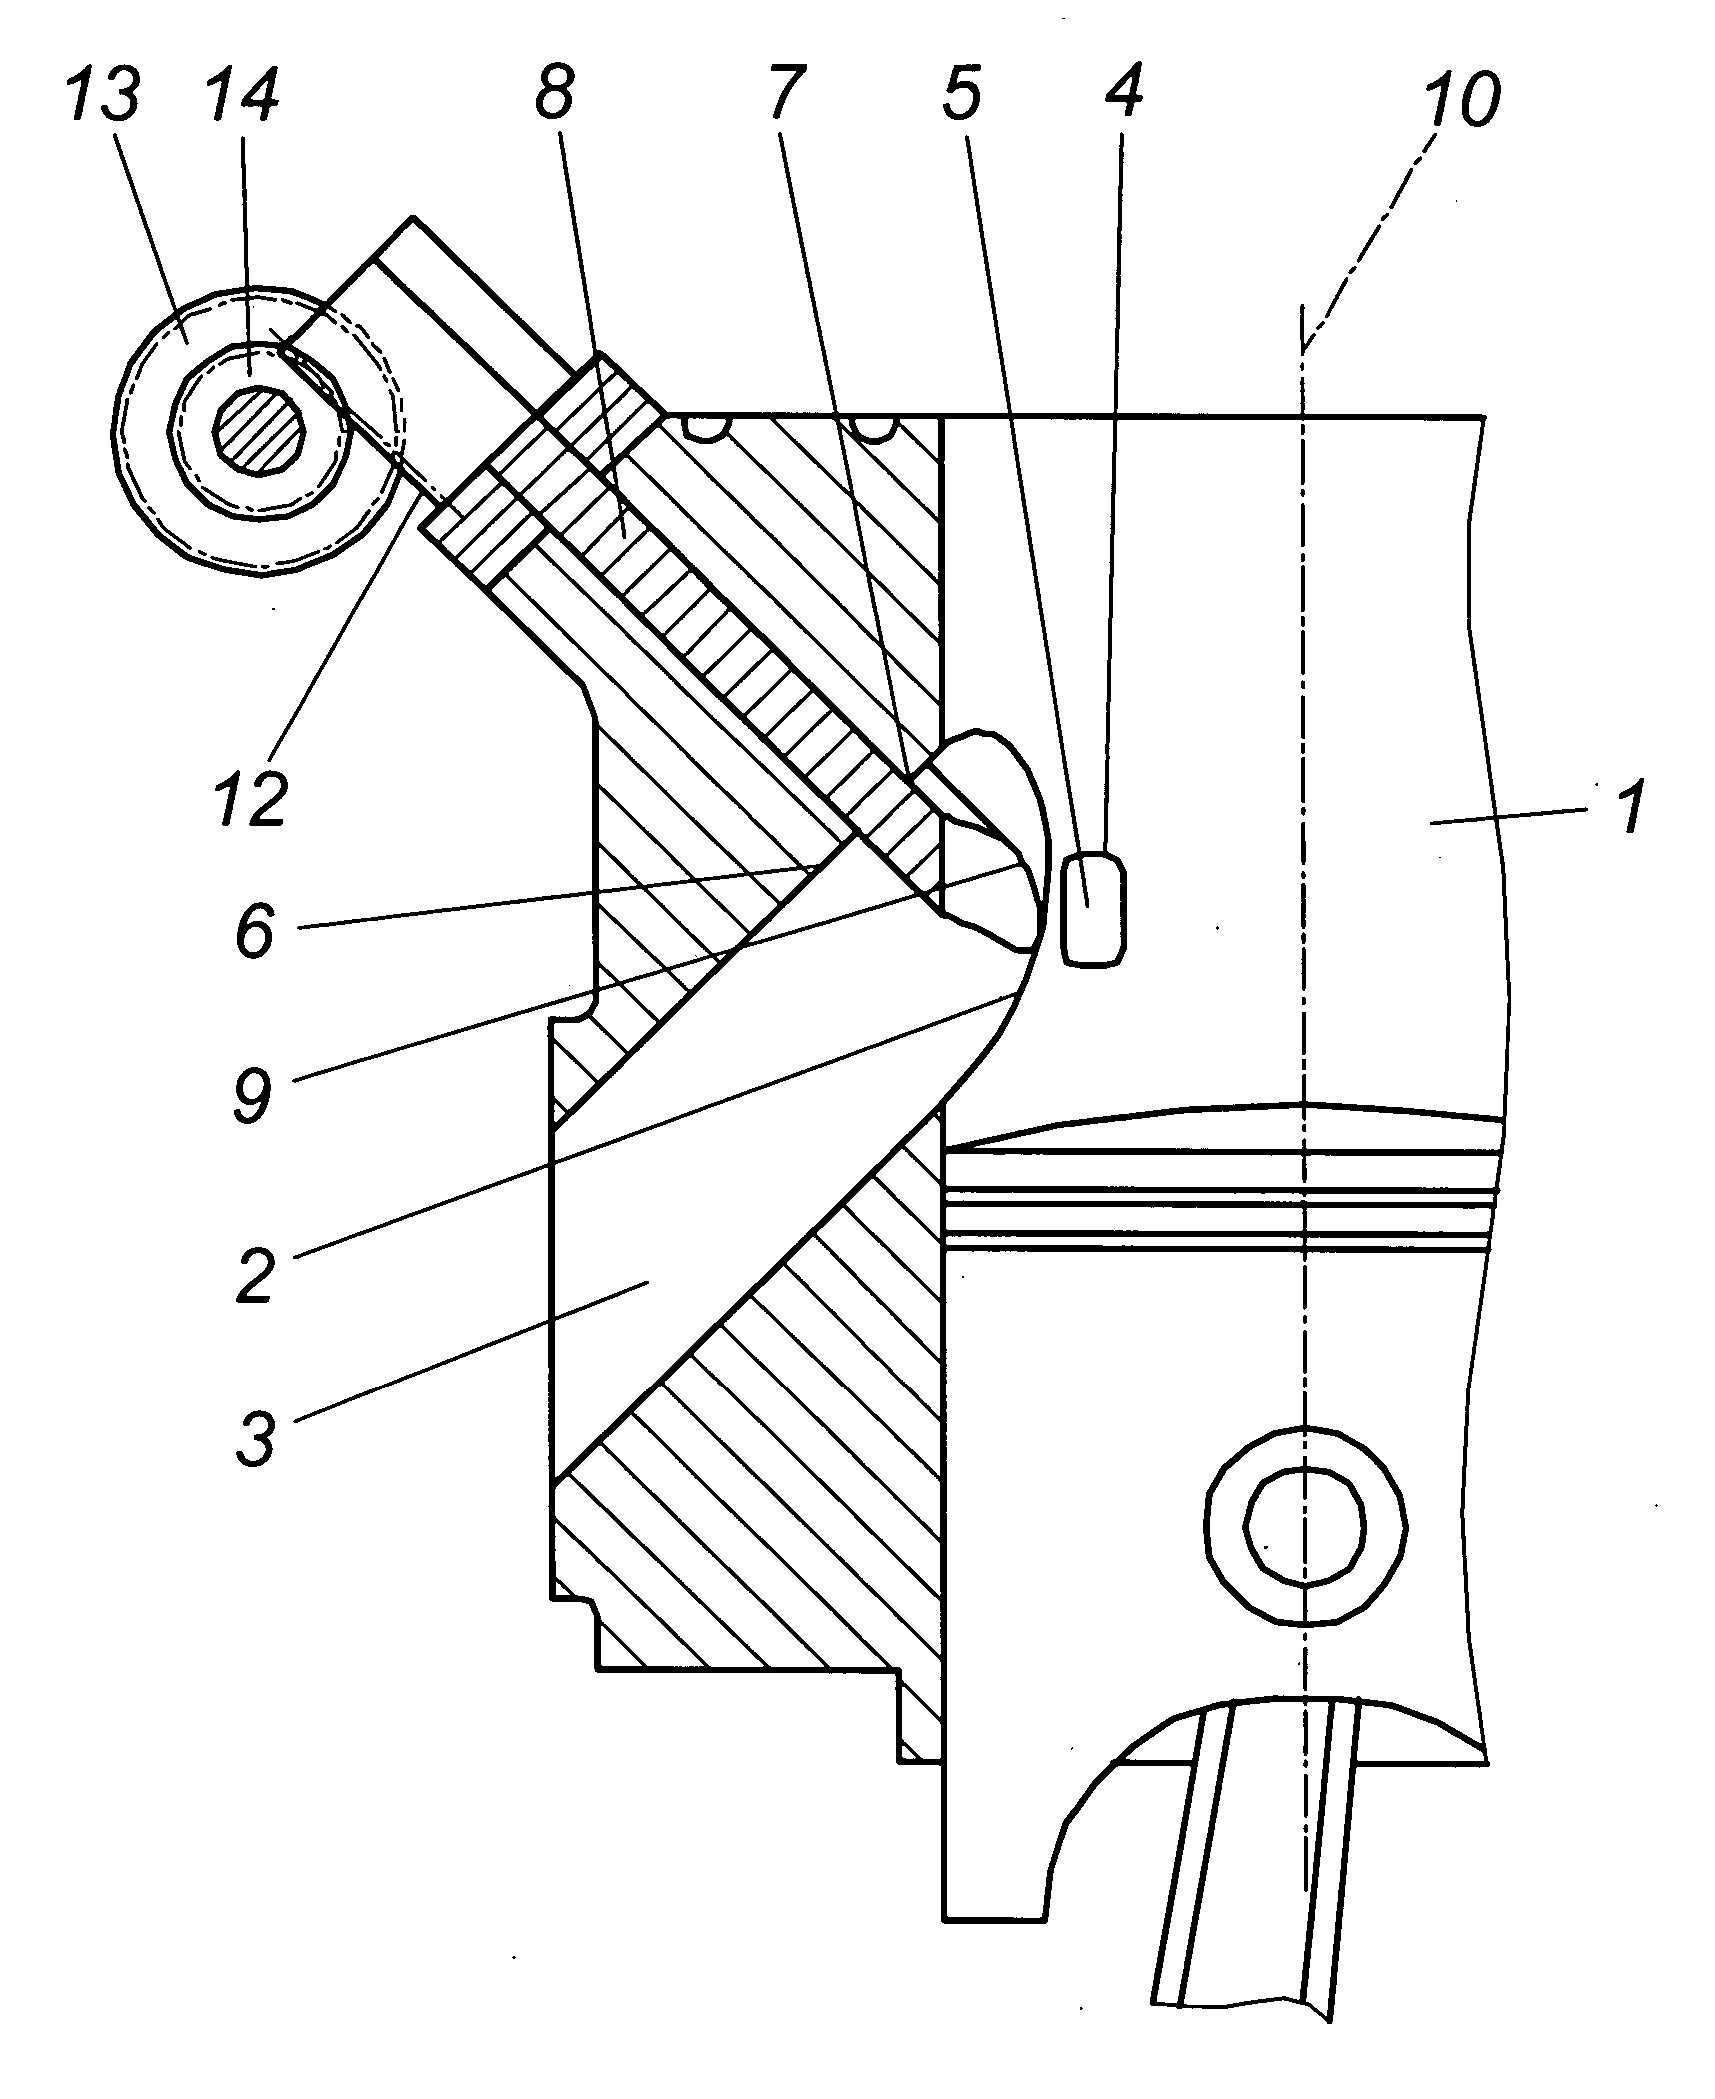 Exhaust control valve for internal combustion engine